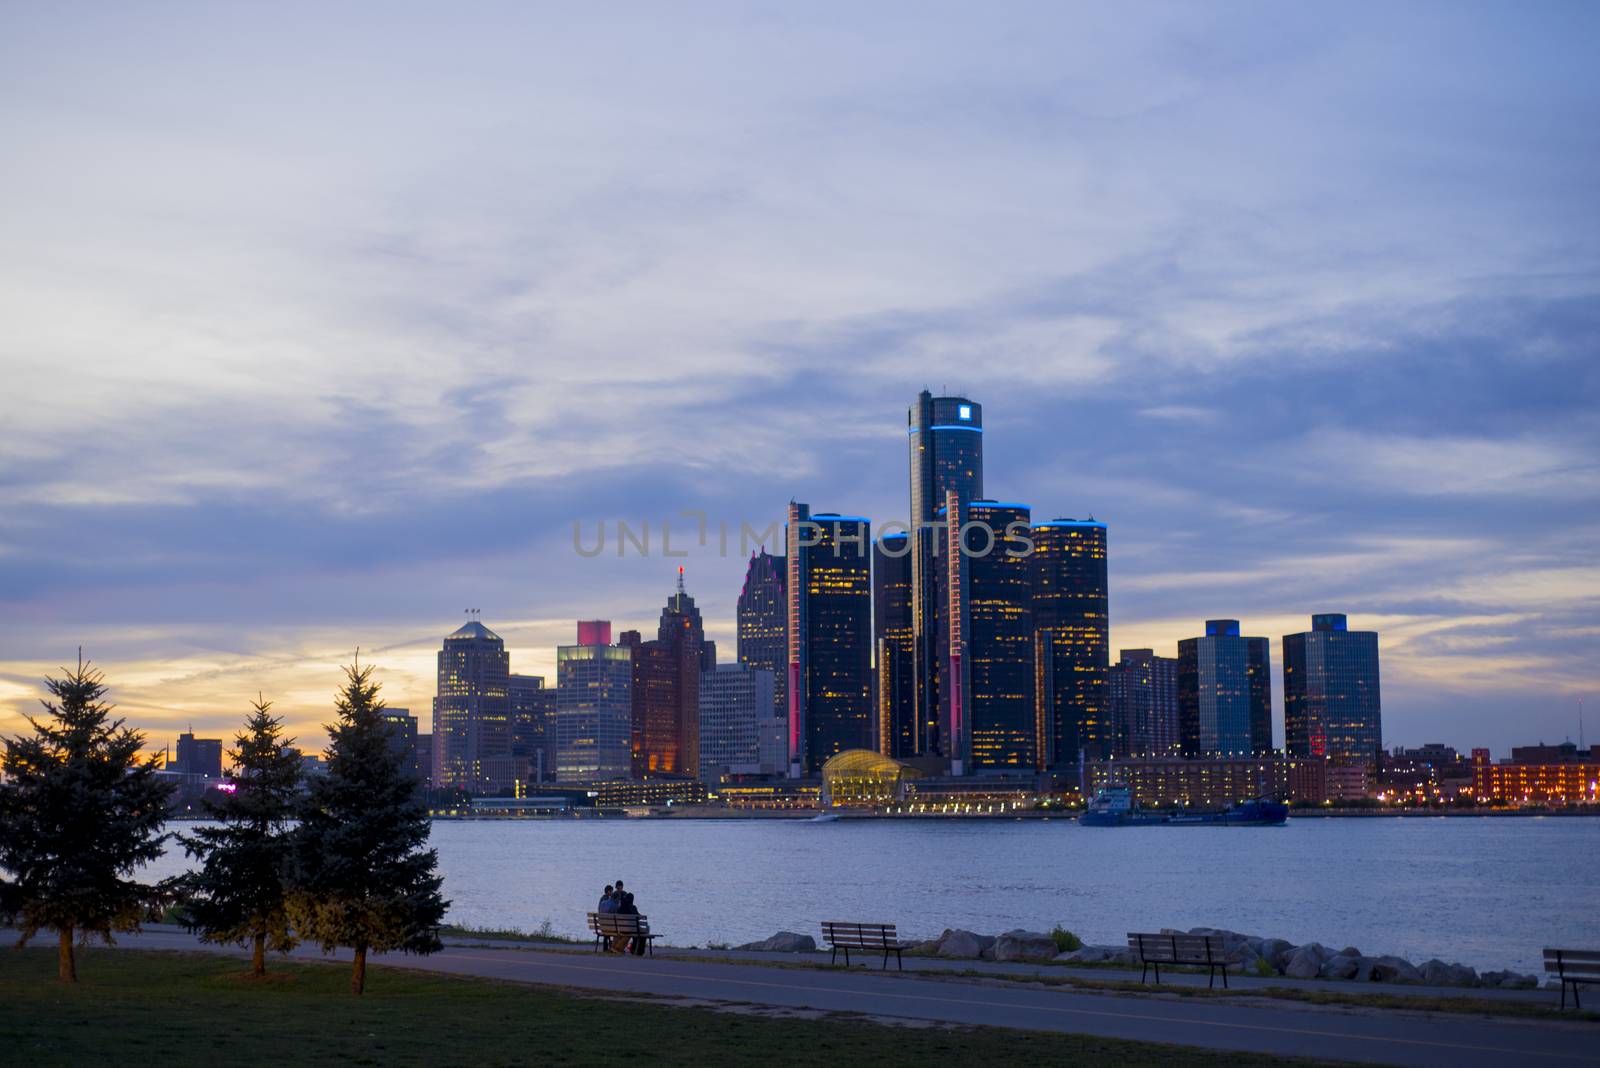 Detroit skyline with the world headquarters for General Motors C by rgbspace